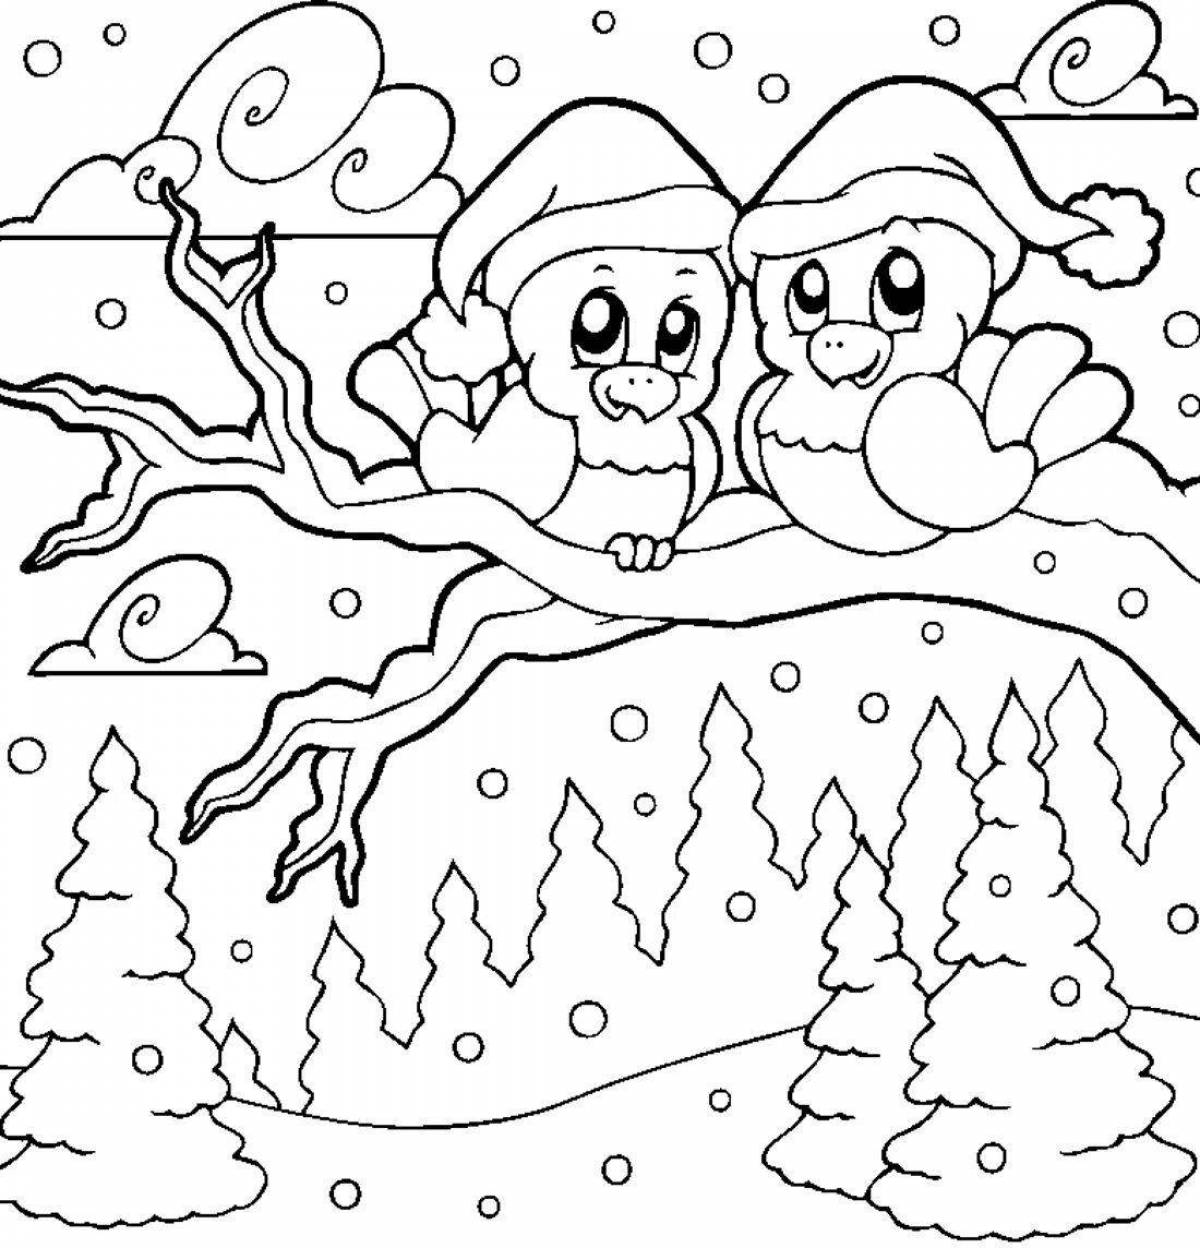 Sweet Christmas bird coloring page